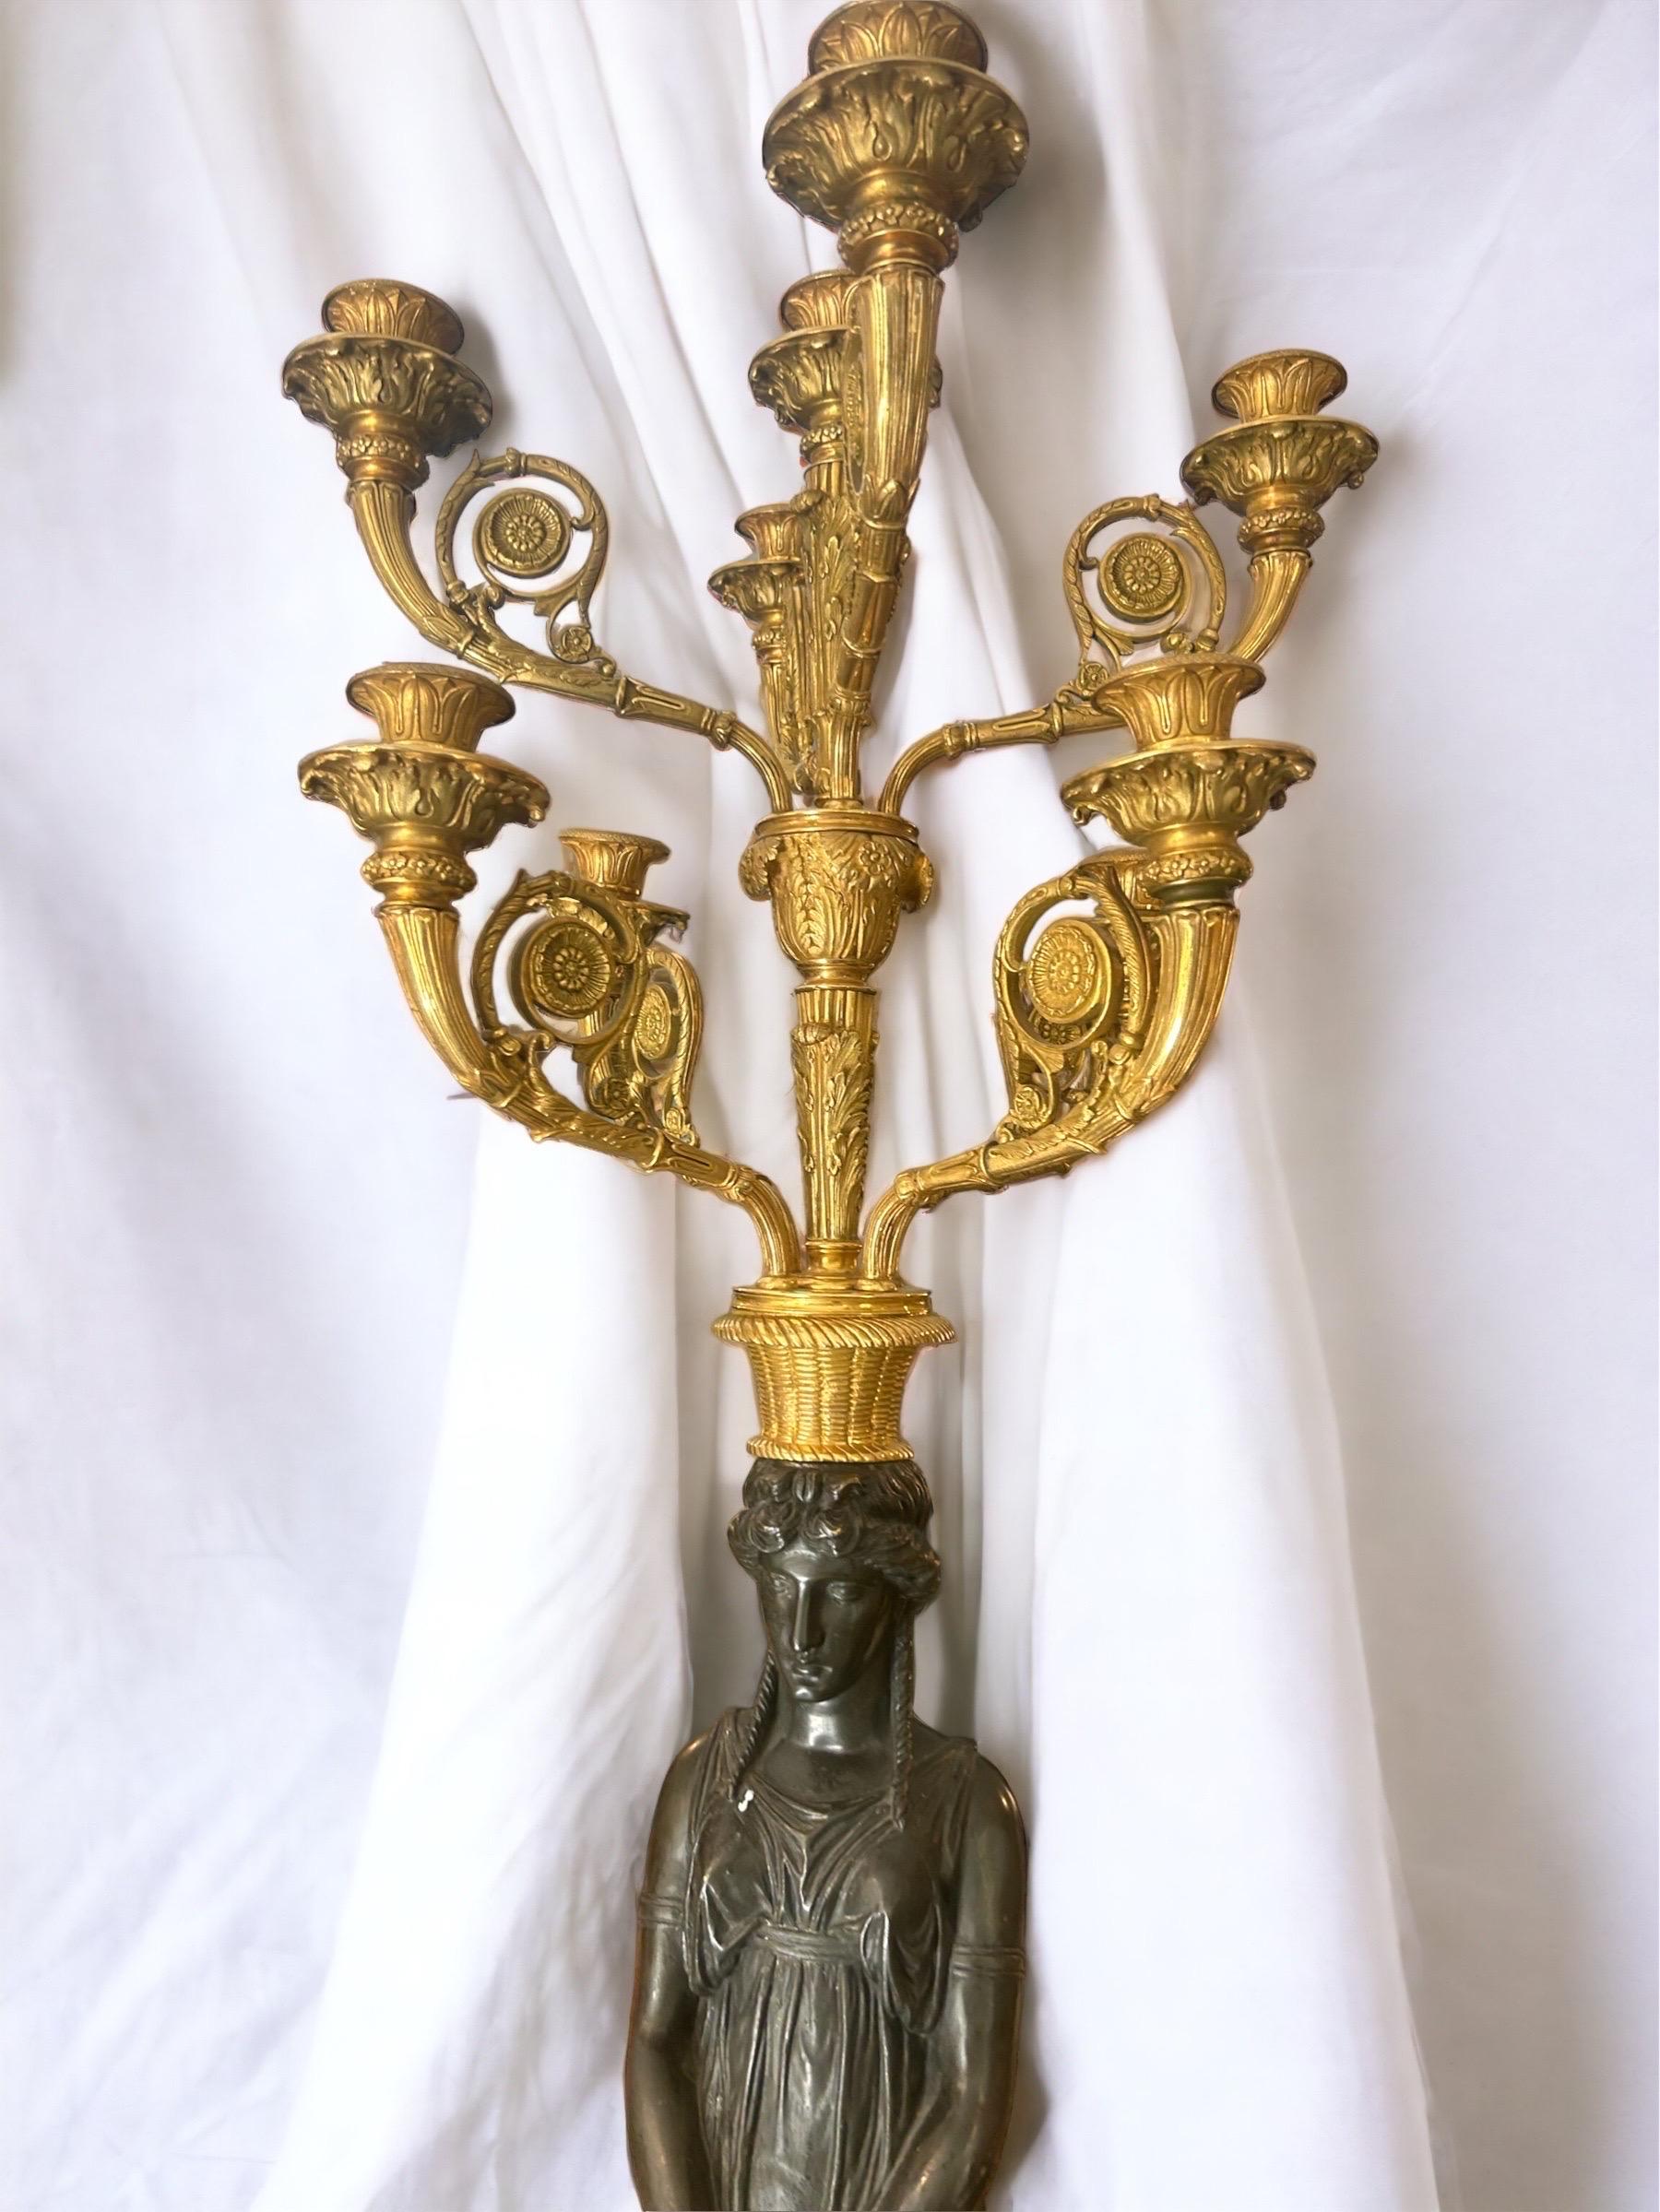 French Pair of 19th Century Candelabras Sculpted in 2 Tone Bronze Gilding